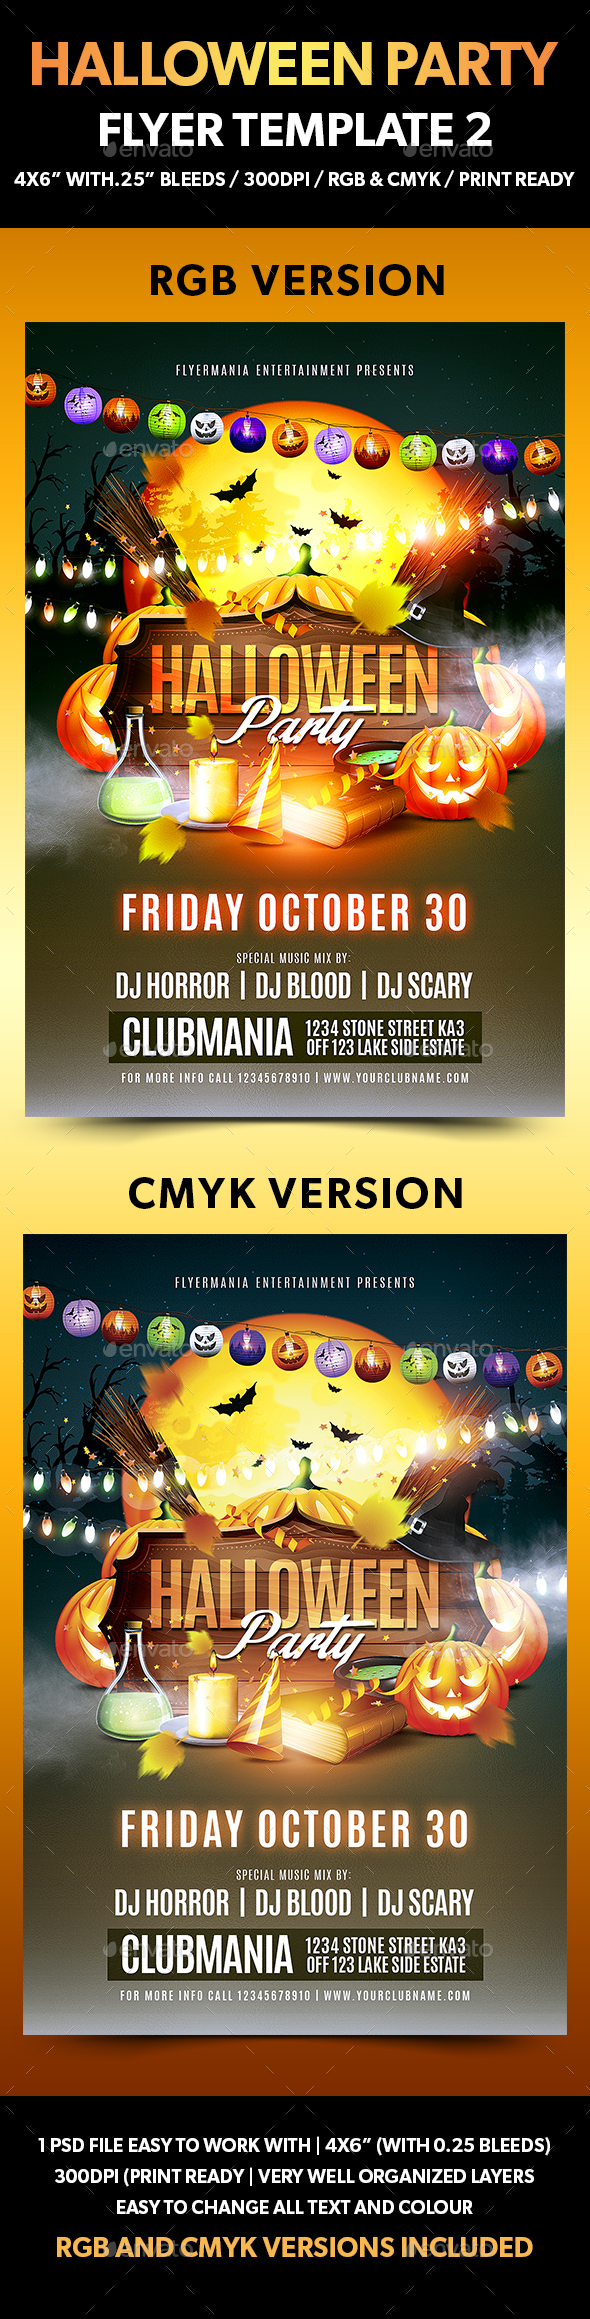 Halloween Party Flyer Template 2